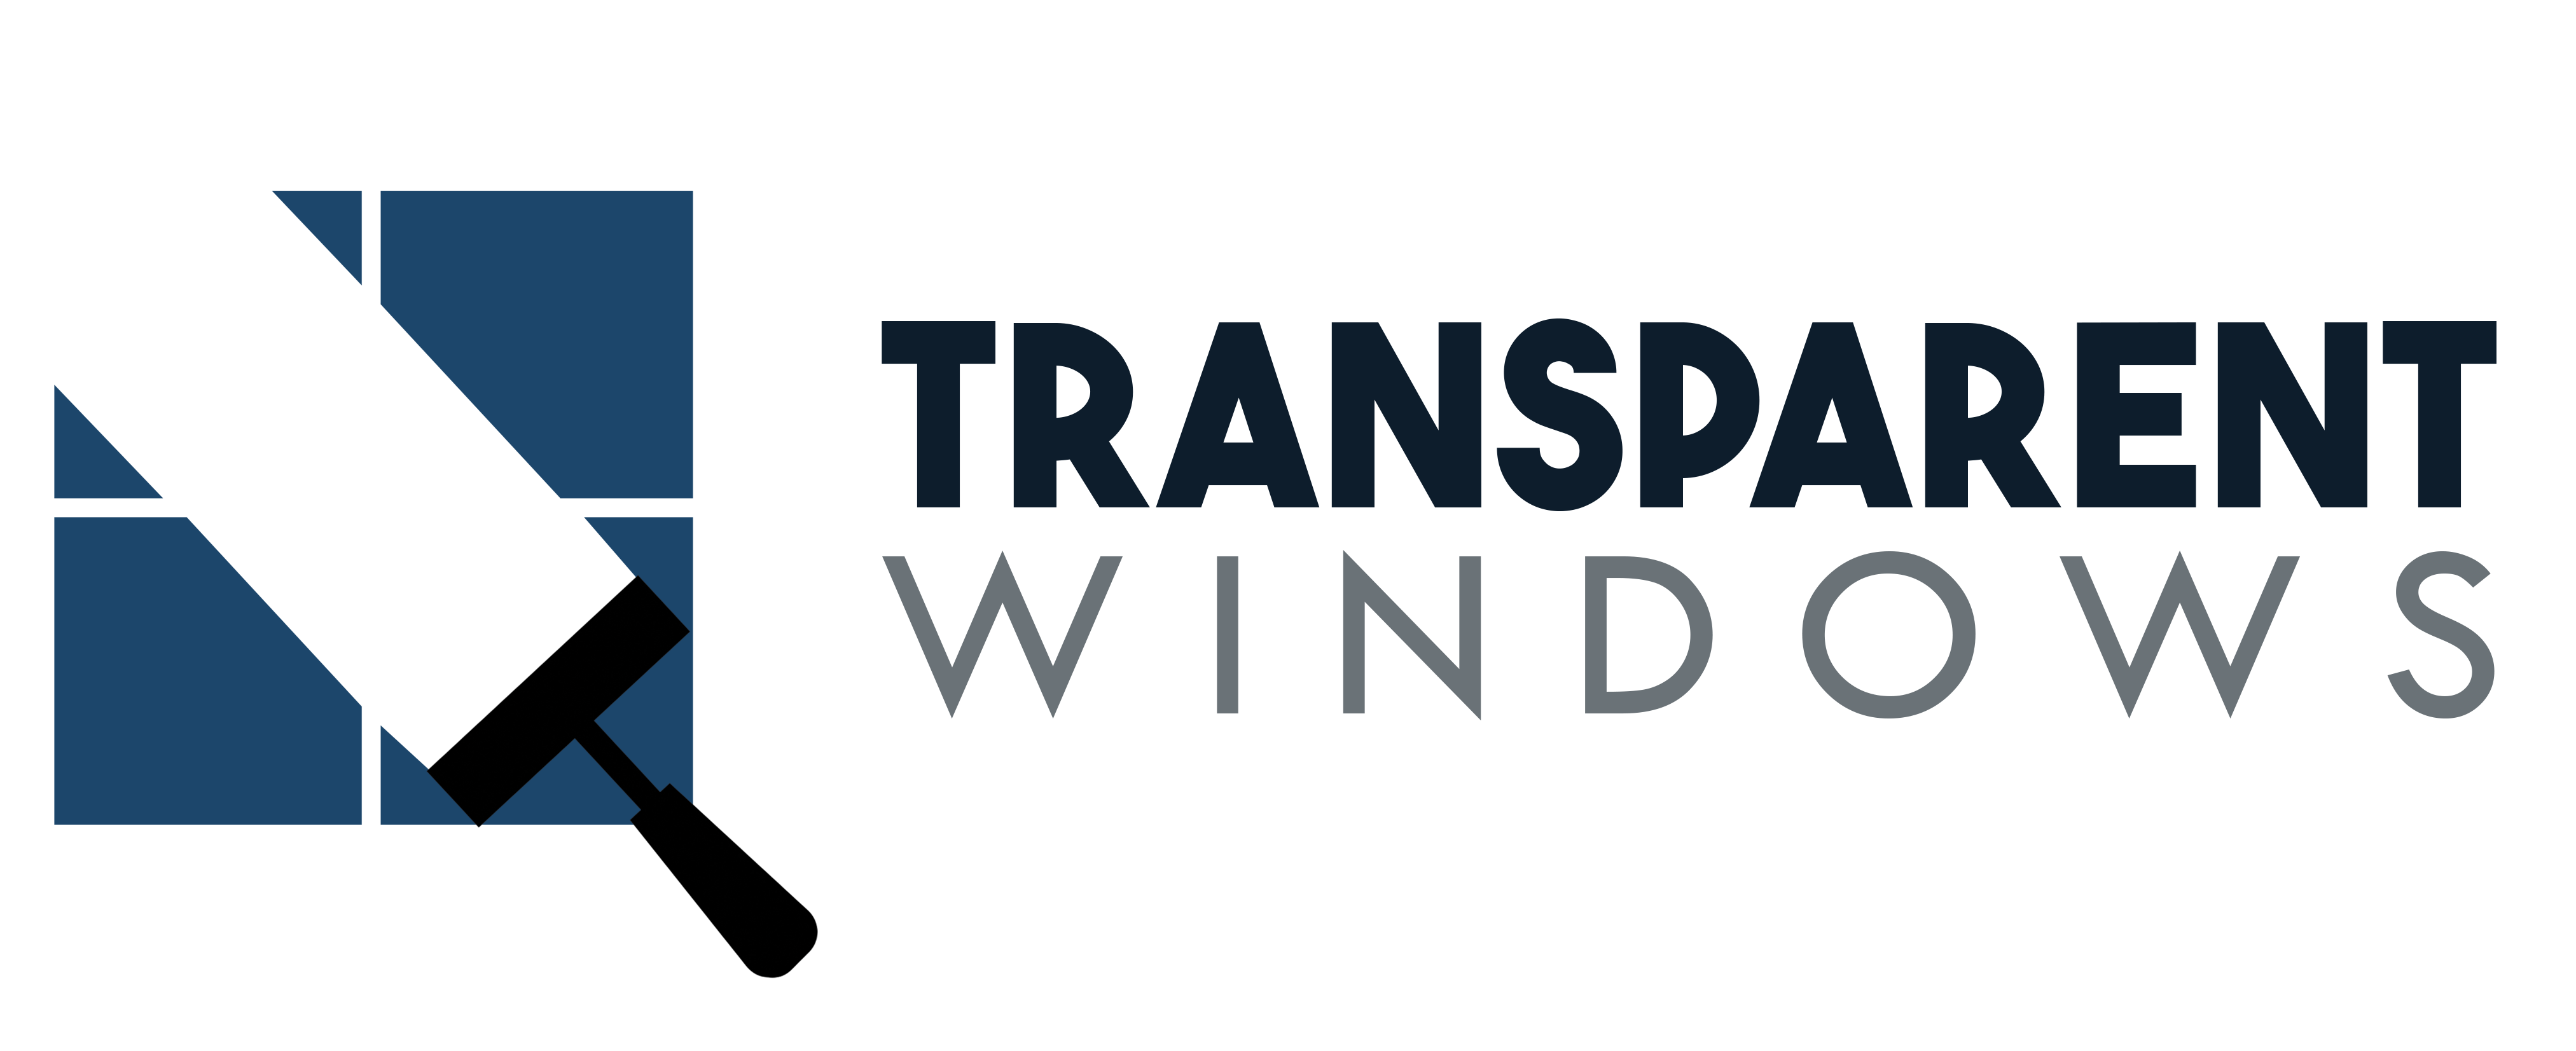 Transparent Windows , Friday, February 28, 2020, Press release picture